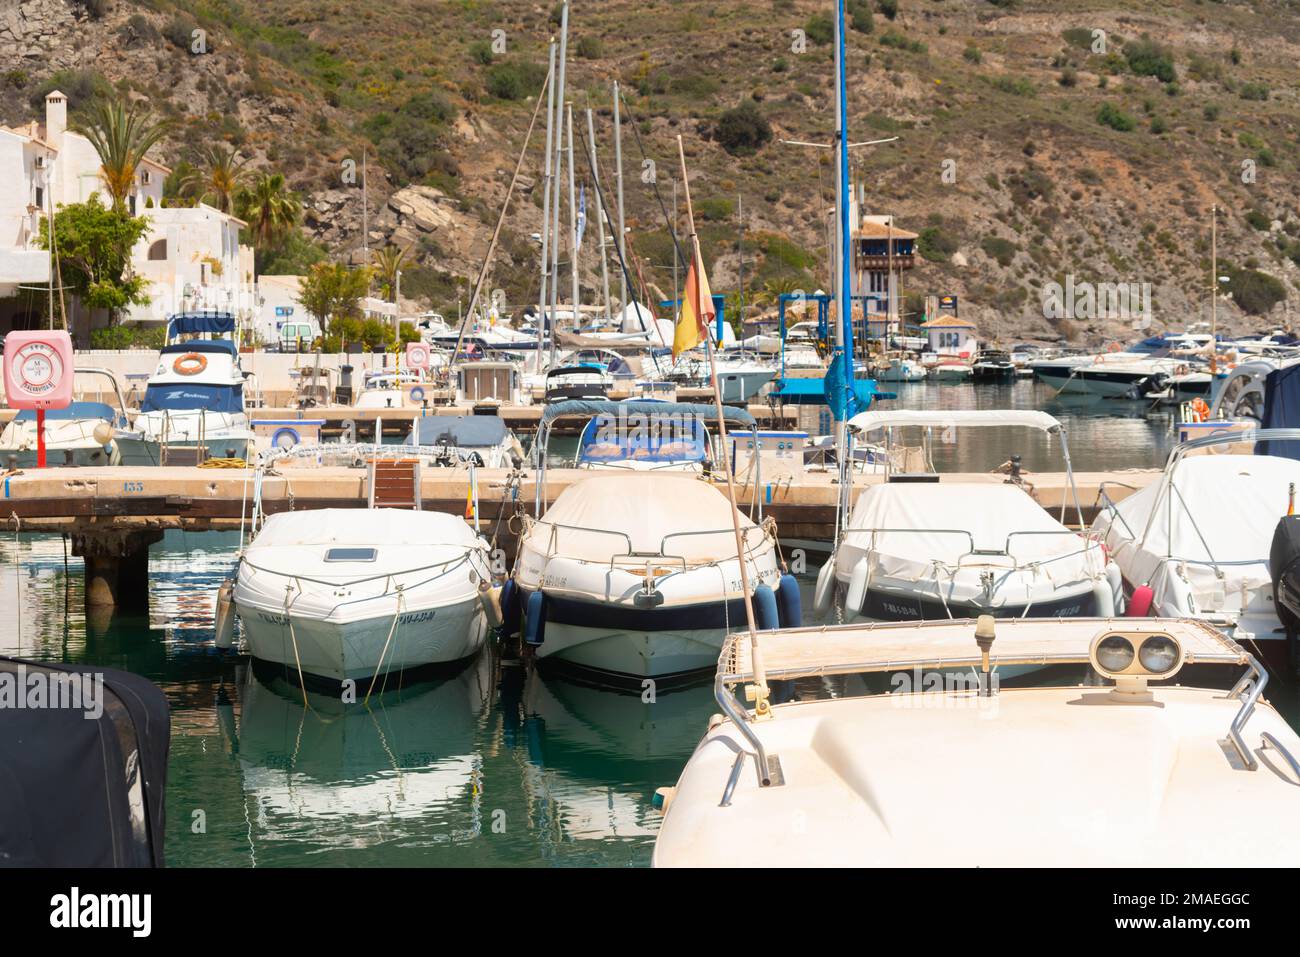 LA HERRADURA, SPAIN - 17 MAY 2022 The Marina del Este port, in a very beautiful natural and privileged position between the mountains and the sea, ser Stock Photo